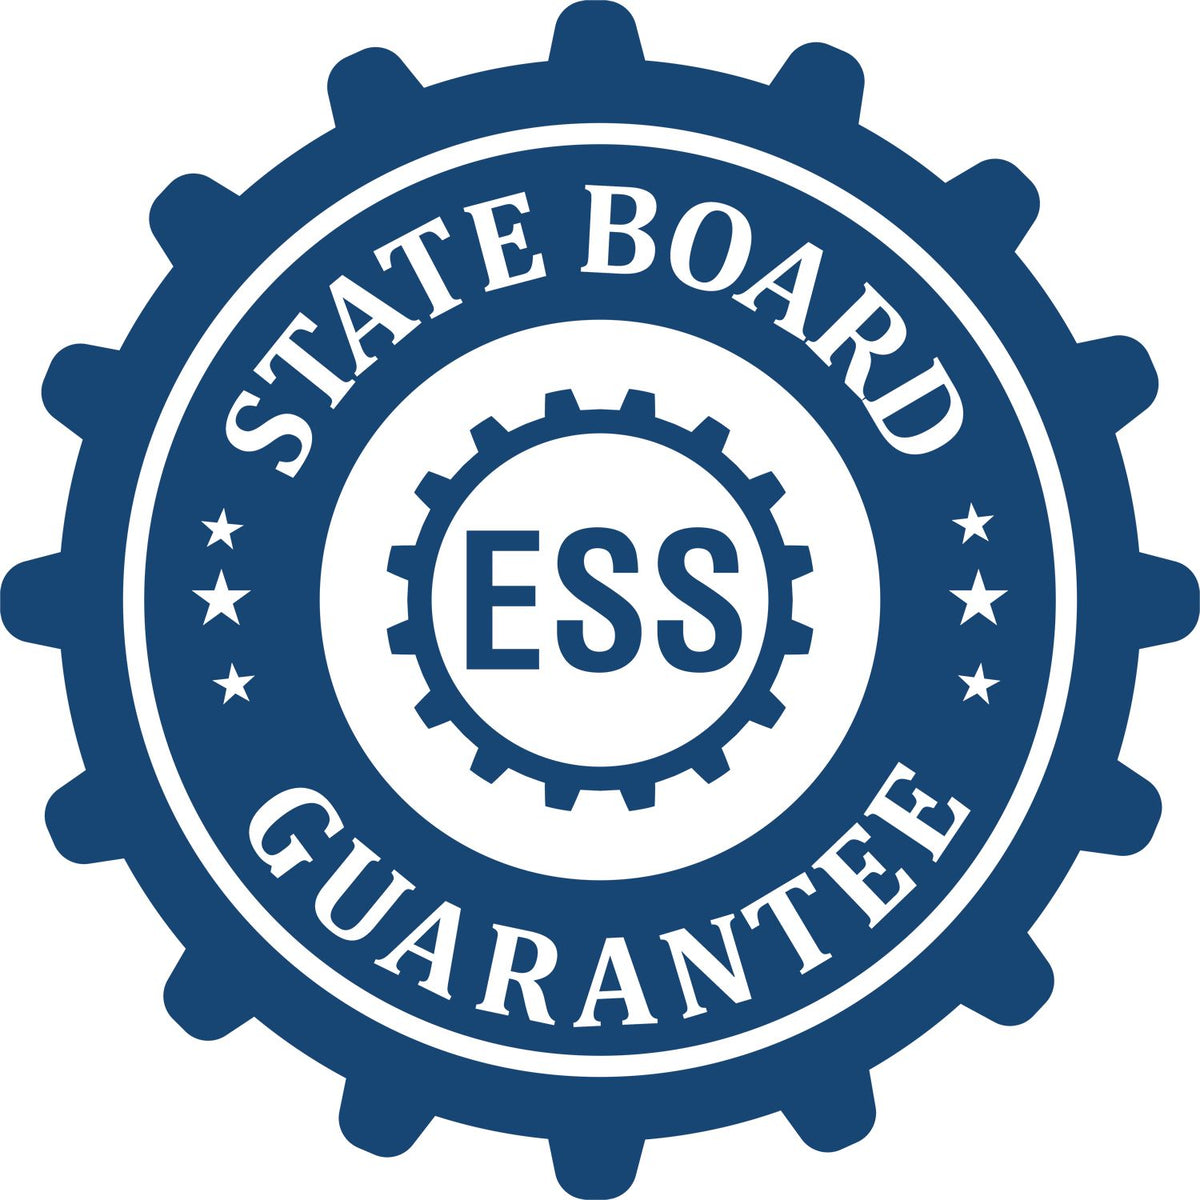 An emblem in a gear shape illustrating a state board guarantee for the Hybrid Pennsylvania Landscape Architect Seal